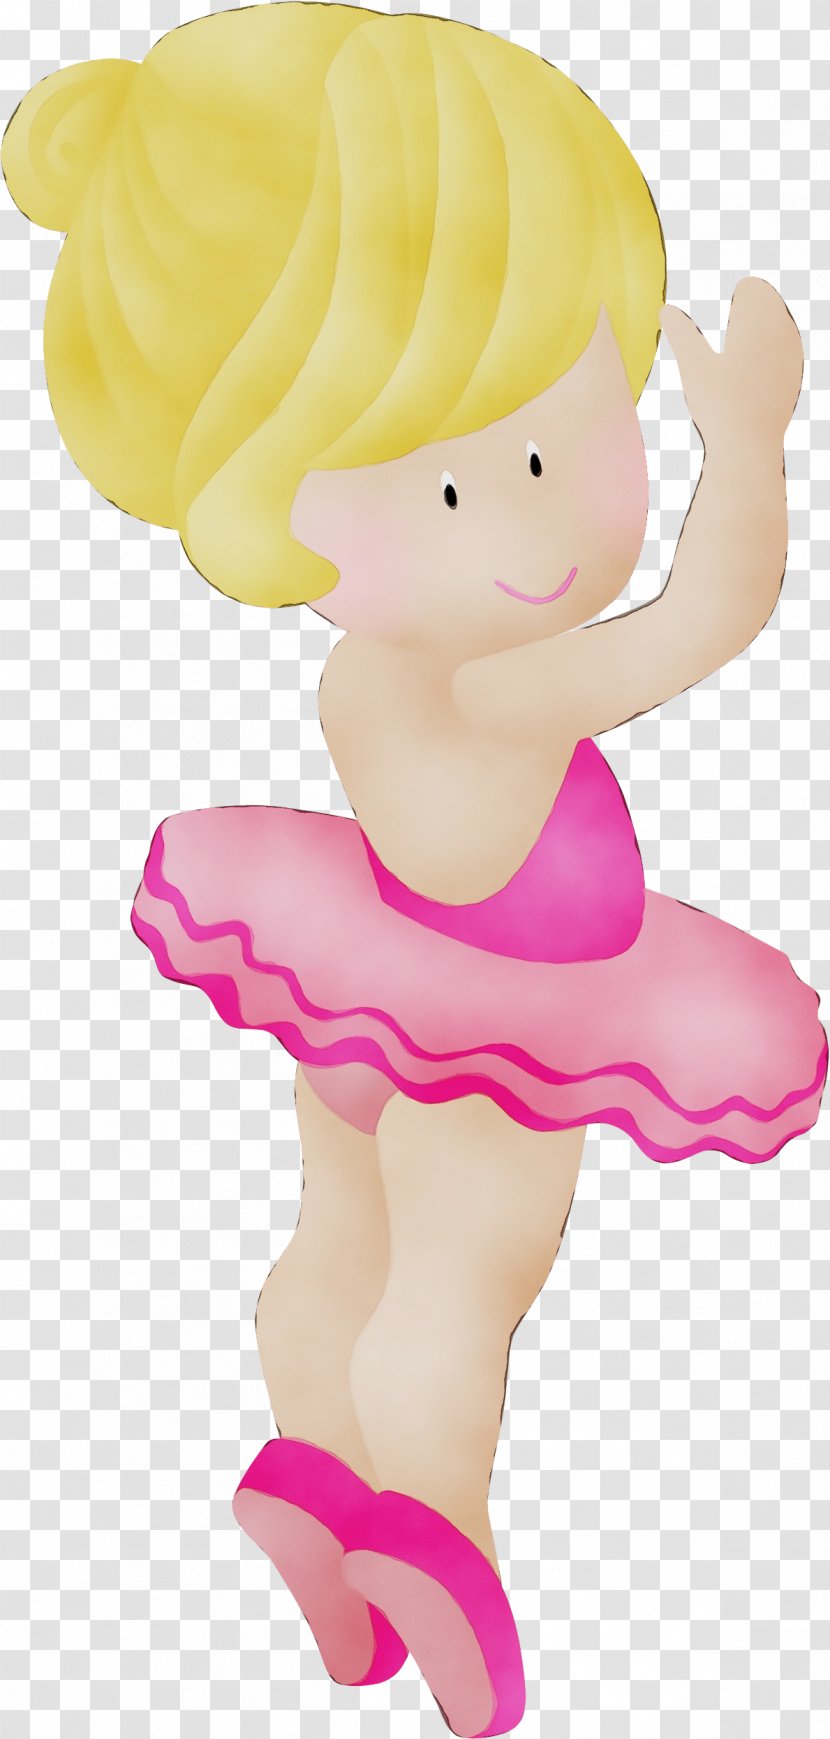 Cartoon Pink Clip Art Figurine Muscle - Smile Animation Transparent PNG